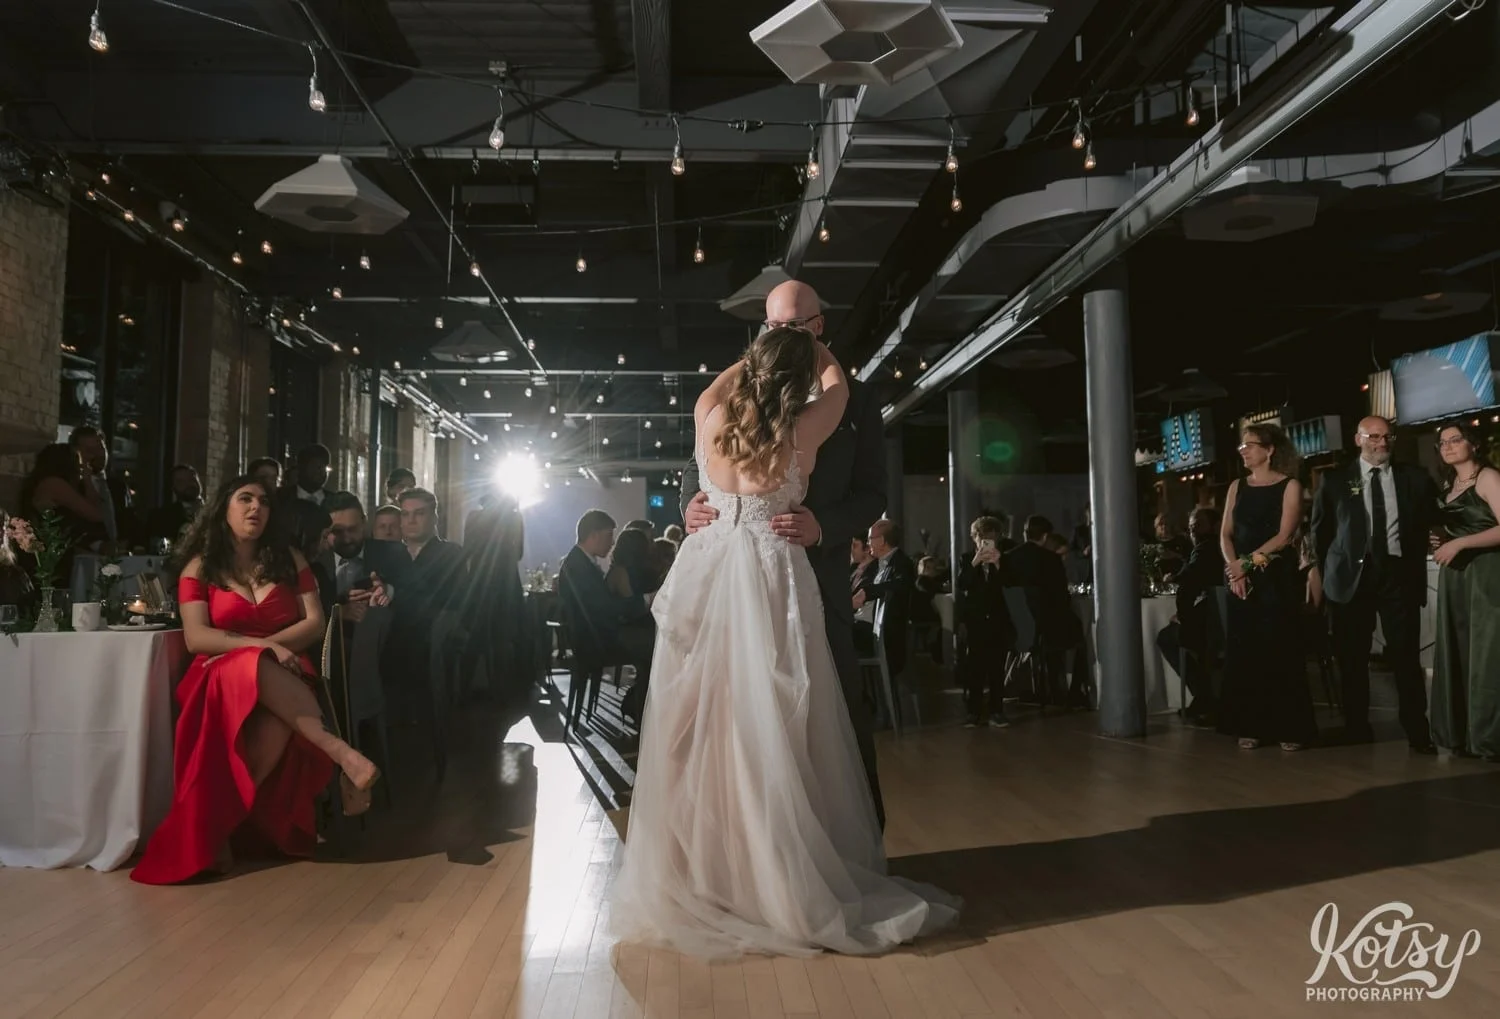 A wide shot from behind a bride and a white wedding gown dancing with her groom during their Second Floor Events wedding reception in Toronto, Canada.